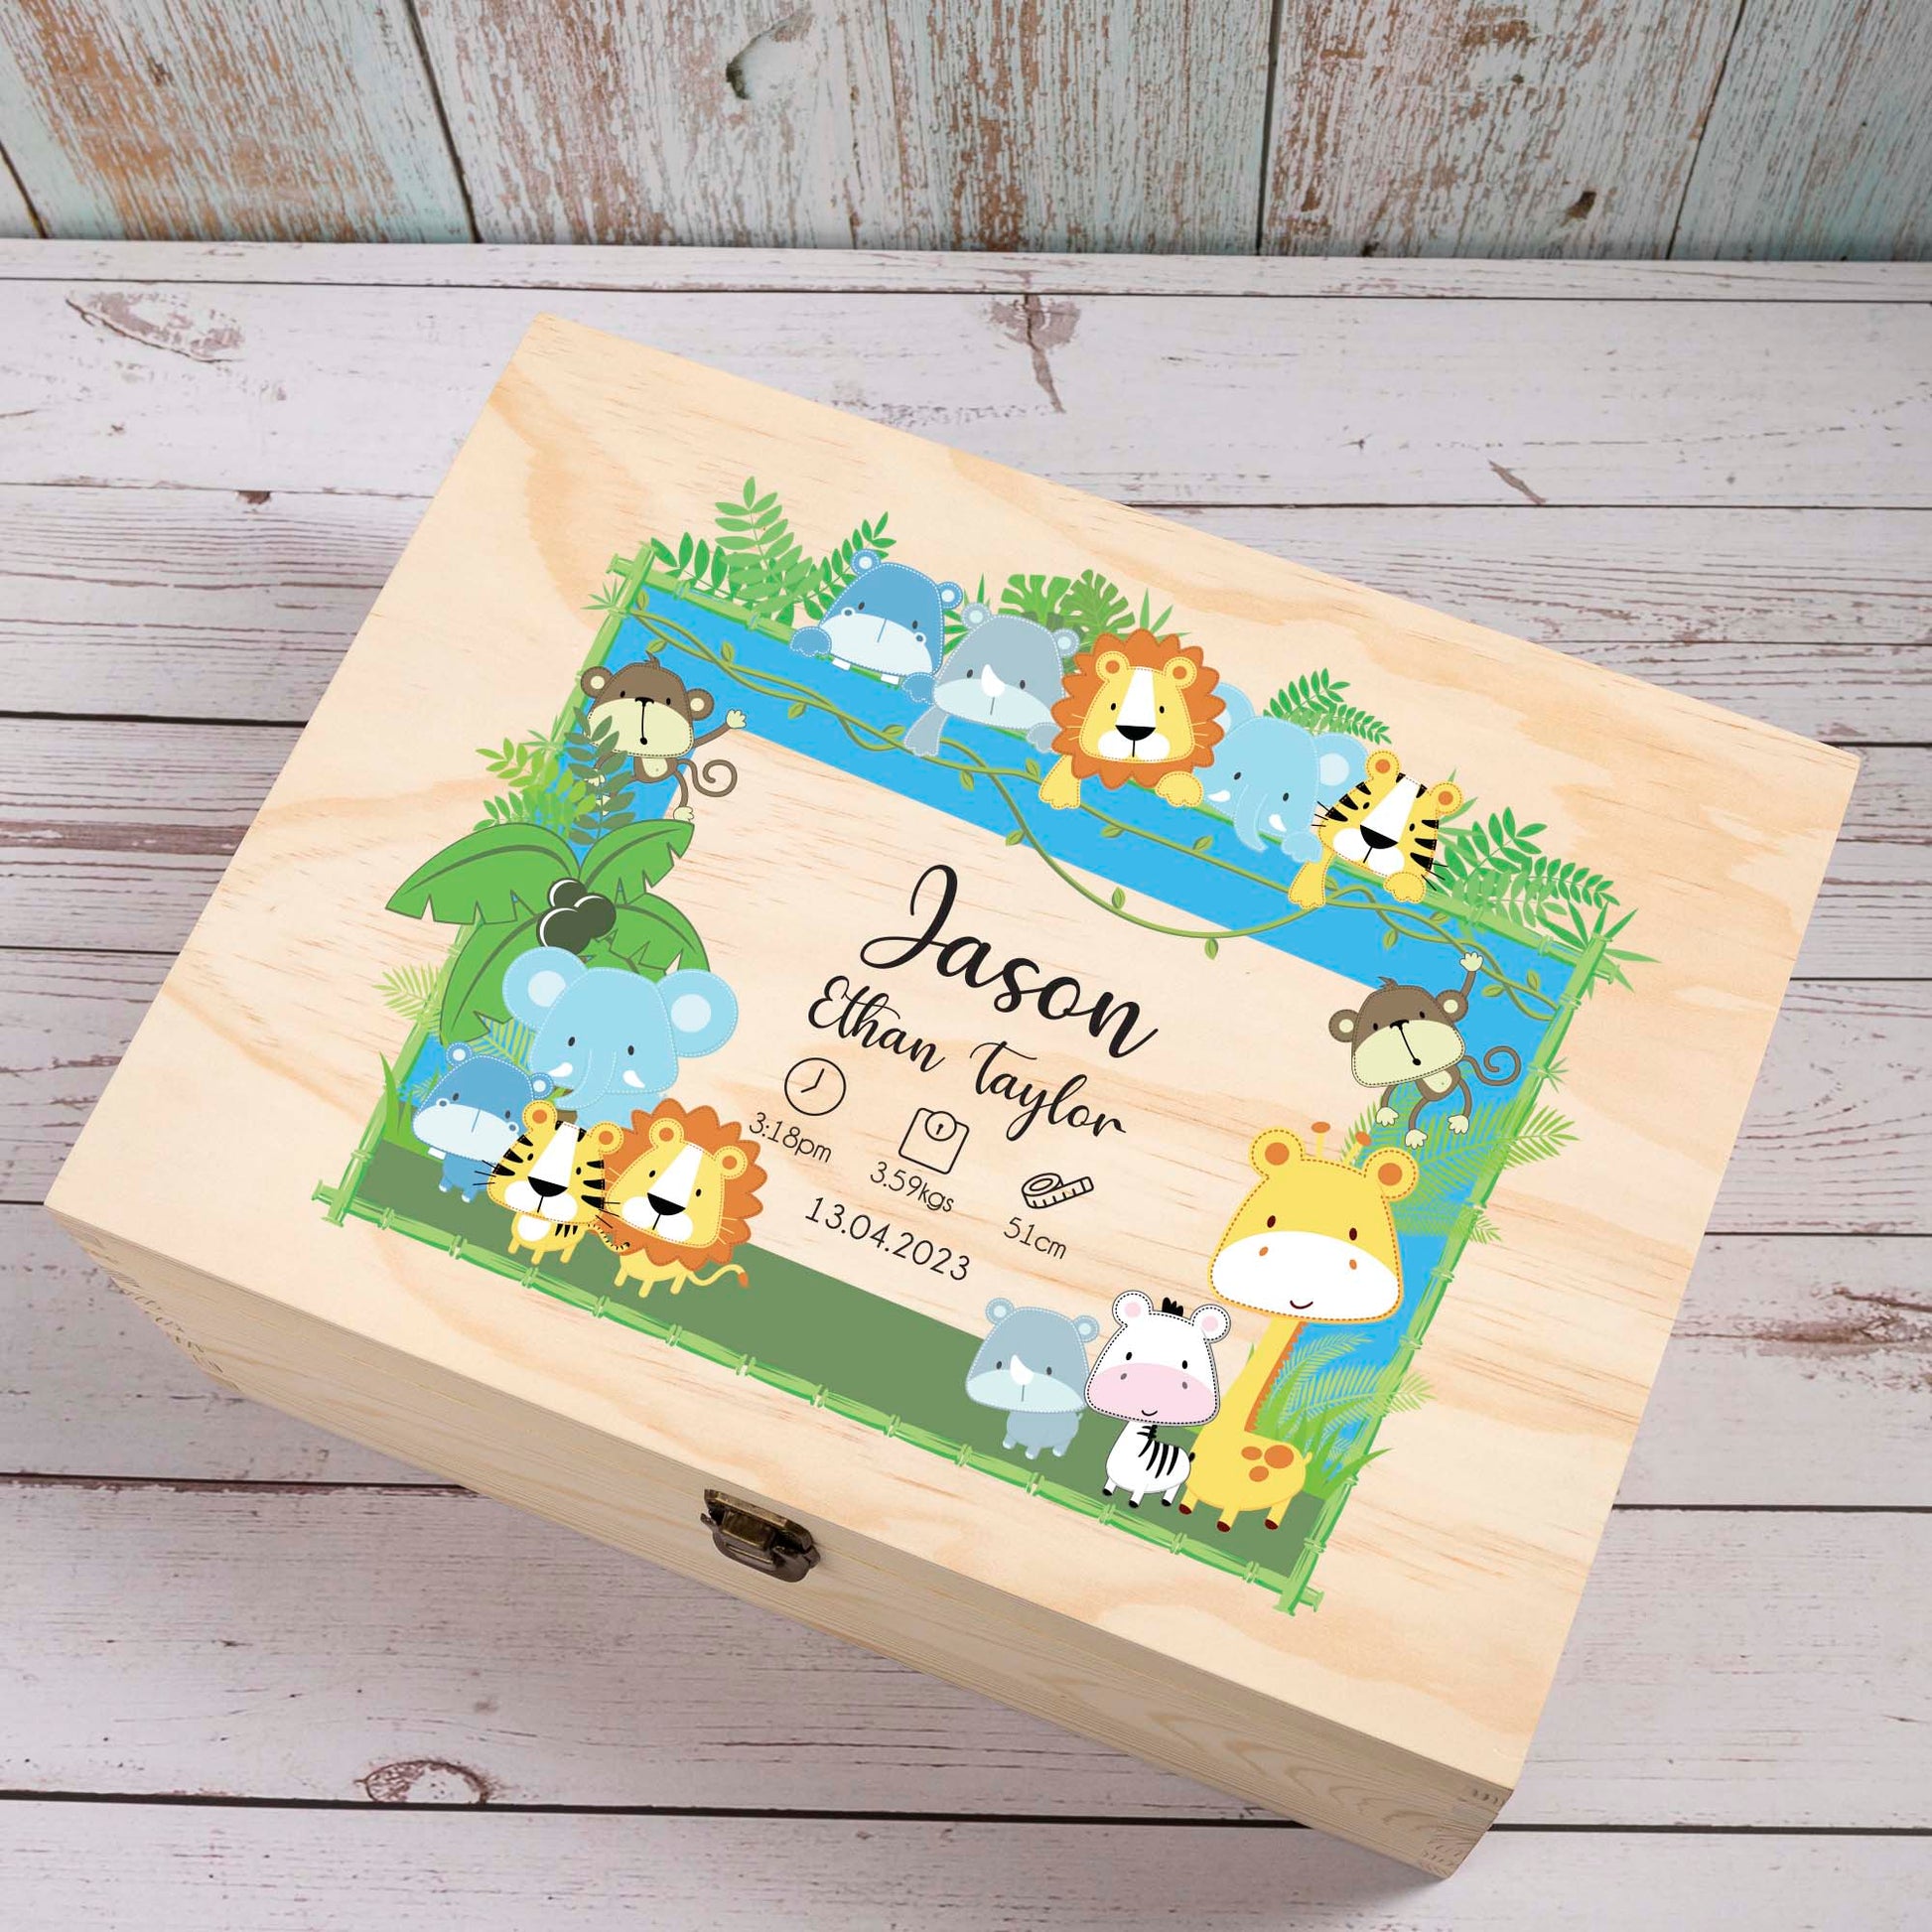 Personalised Wooden Keepsake Box, New Baby and New Mom Gift for Baptism / Christening